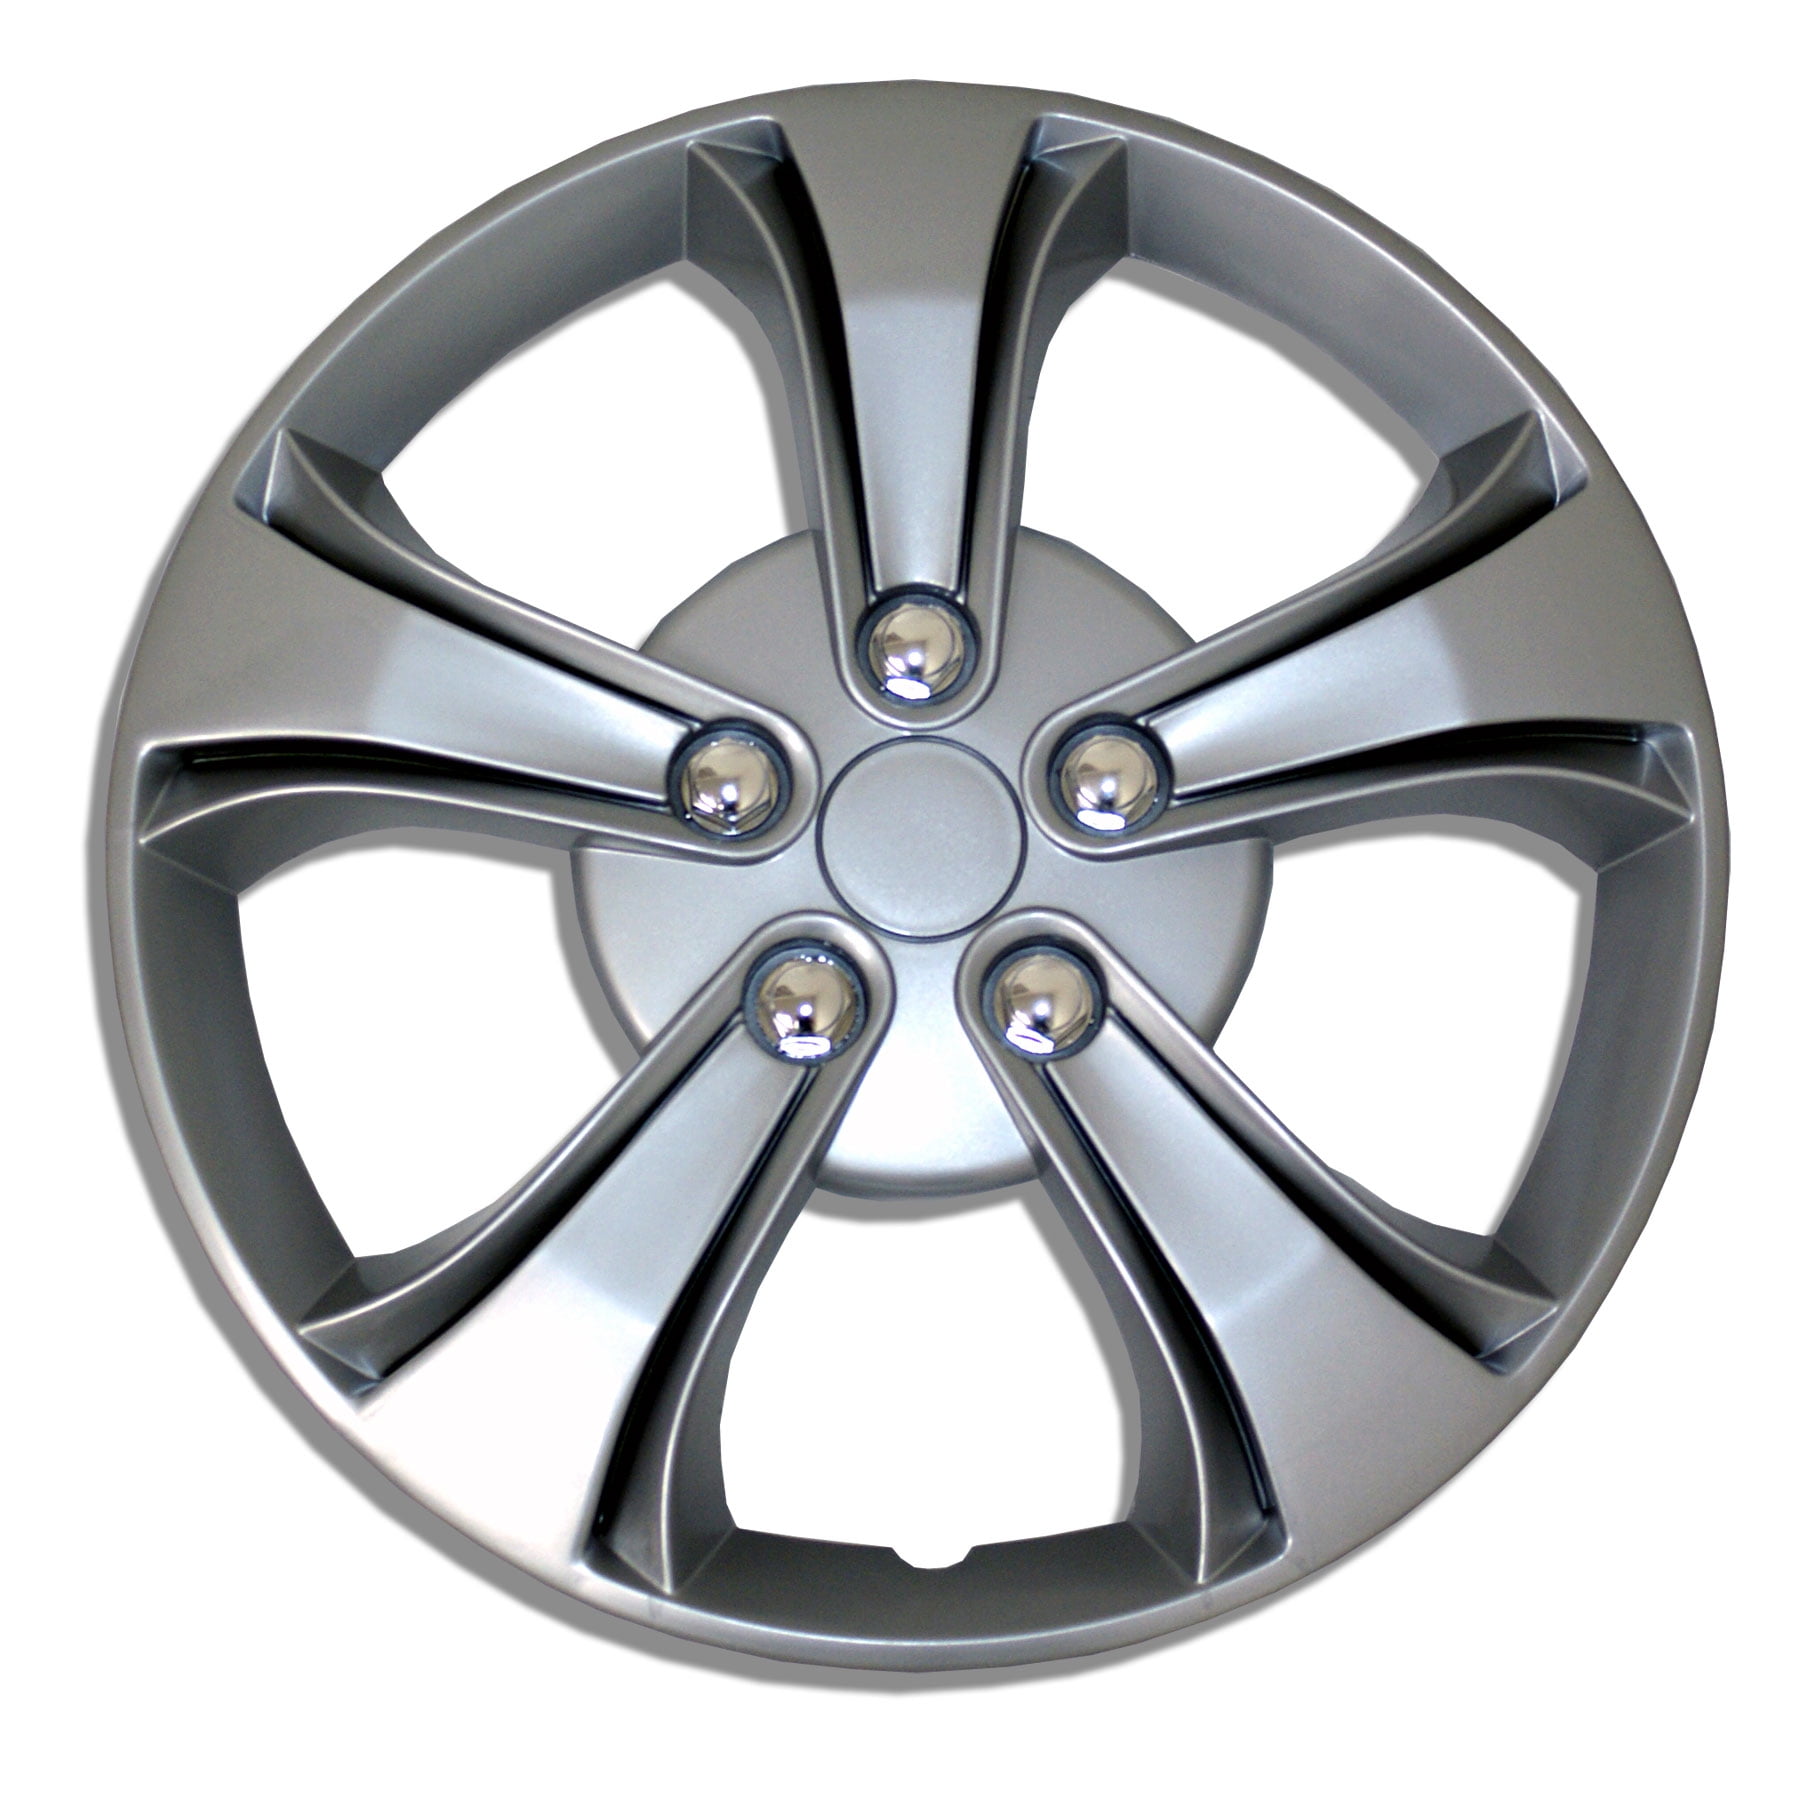 17-Inches Style 616 Snap-On Tuningpros WC3-17-616-S Pack of 4 Hubcaps Type Metallic Silver Wheel Covers Hub-caps Pop-On